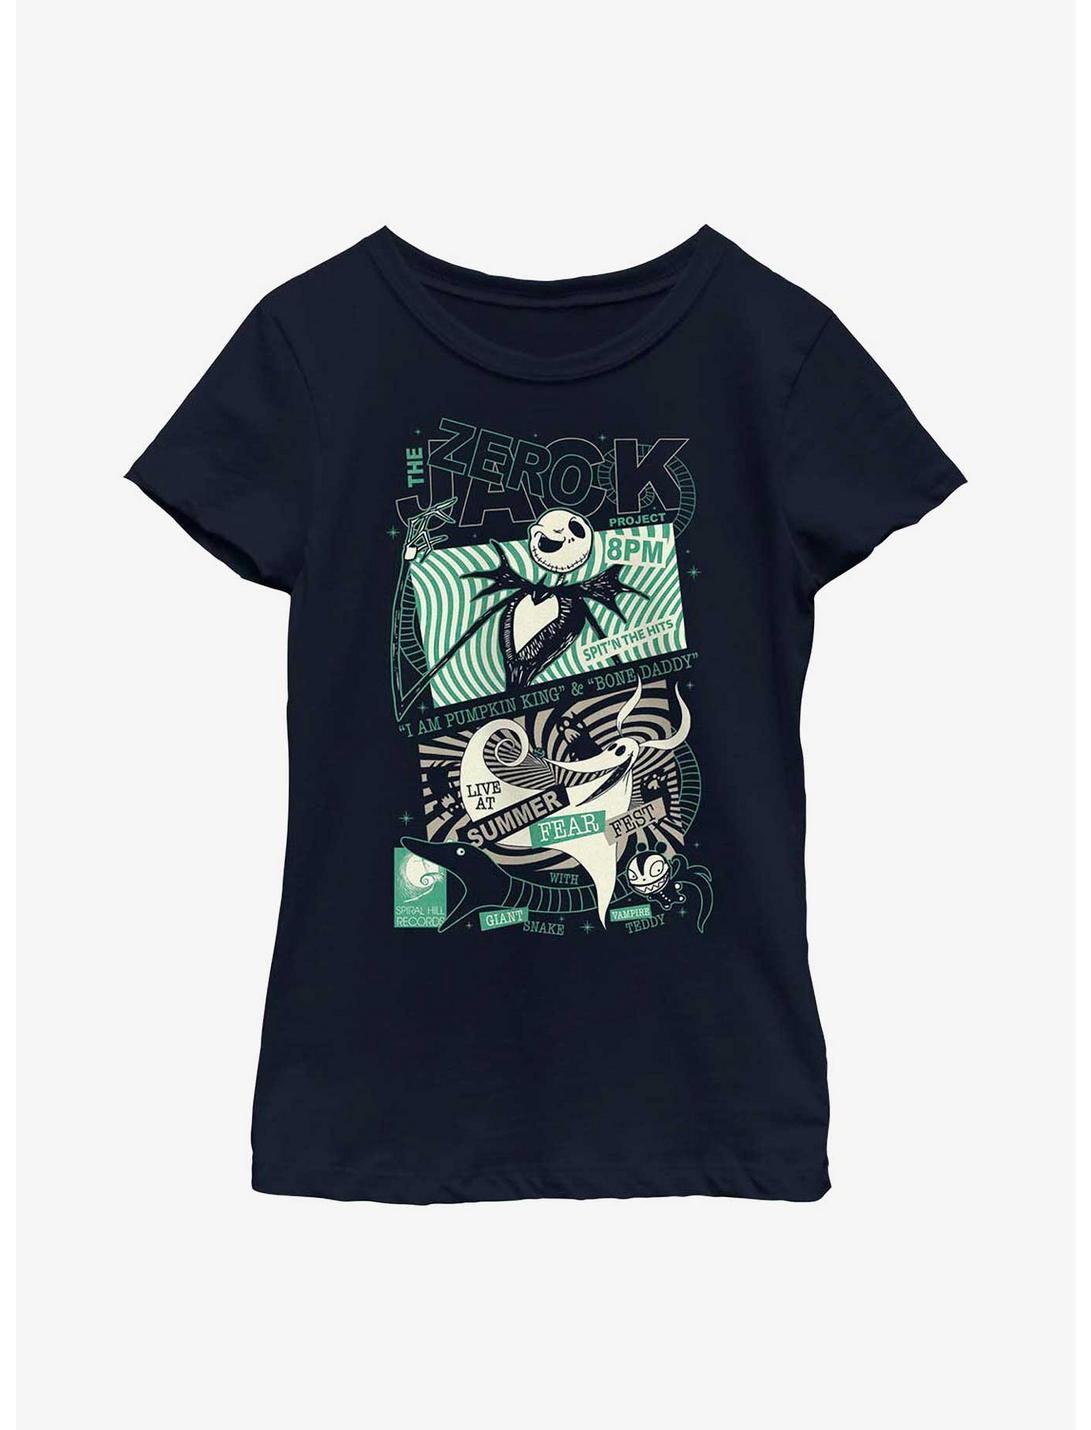 Disney The Nightmare Before Christmas Jack & Zero Fear Fest Poster Youth Girls T-Shirt, NAVY, hi-res